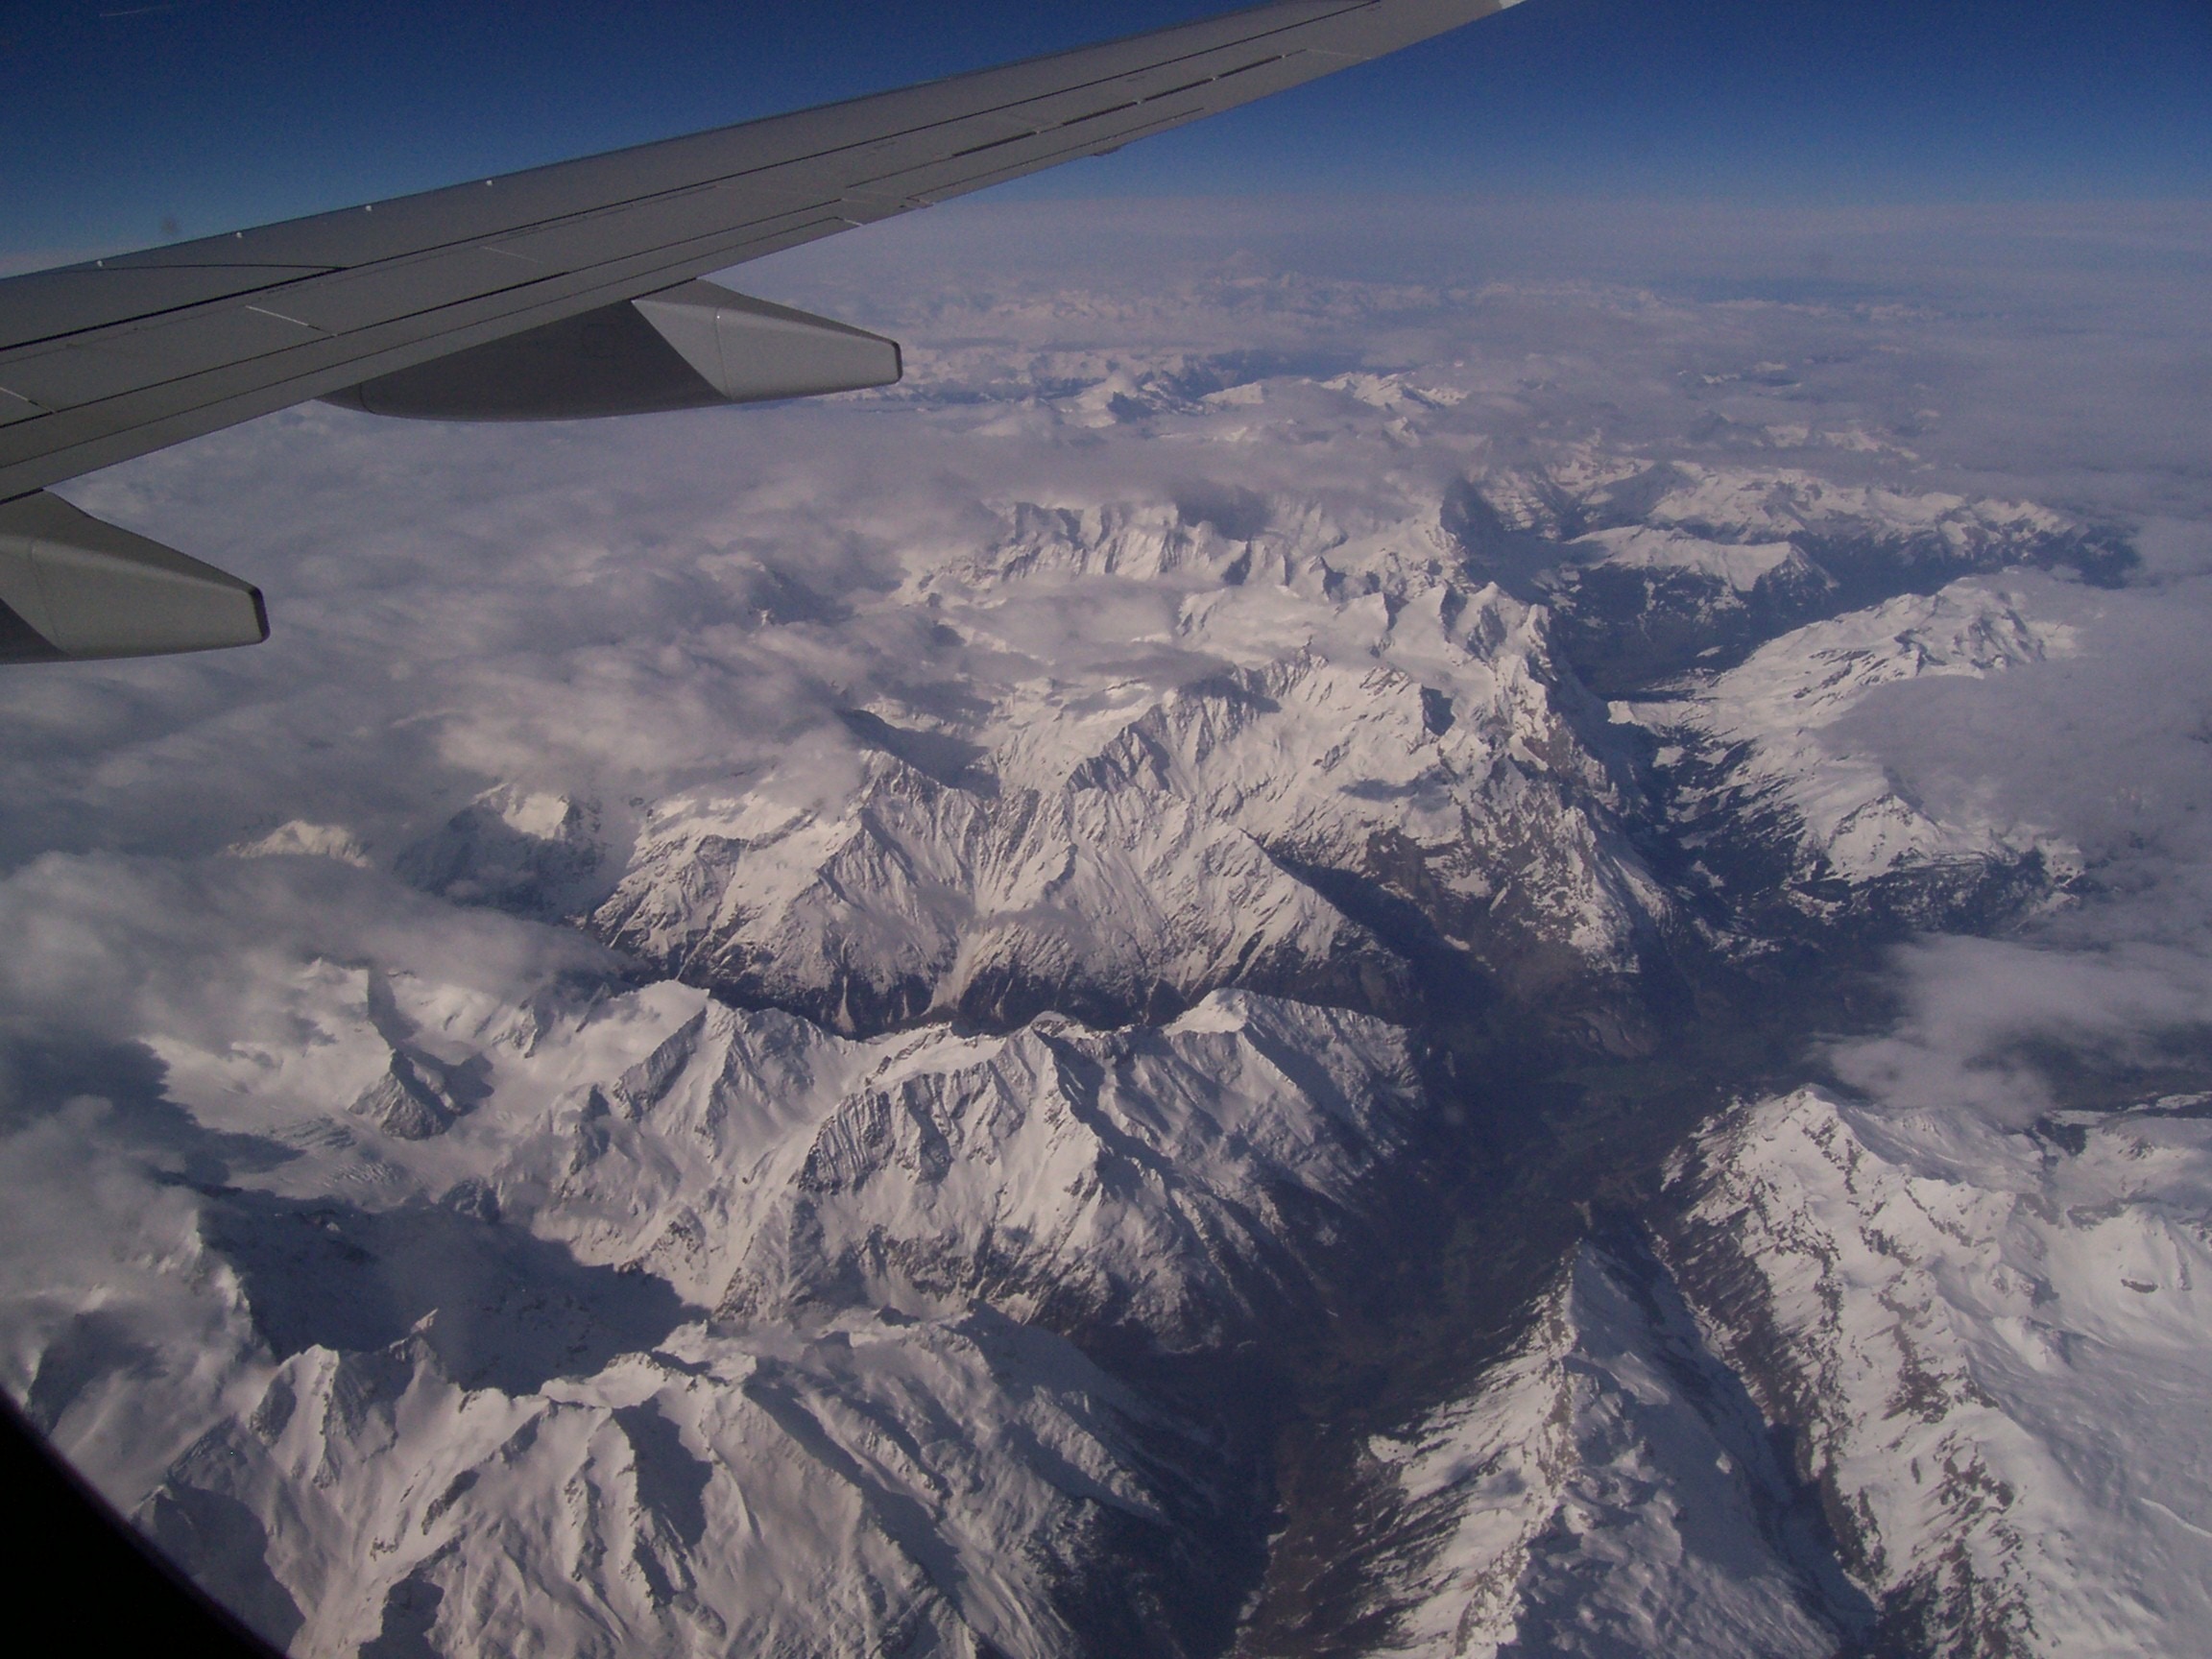 snow capped mountain ranges